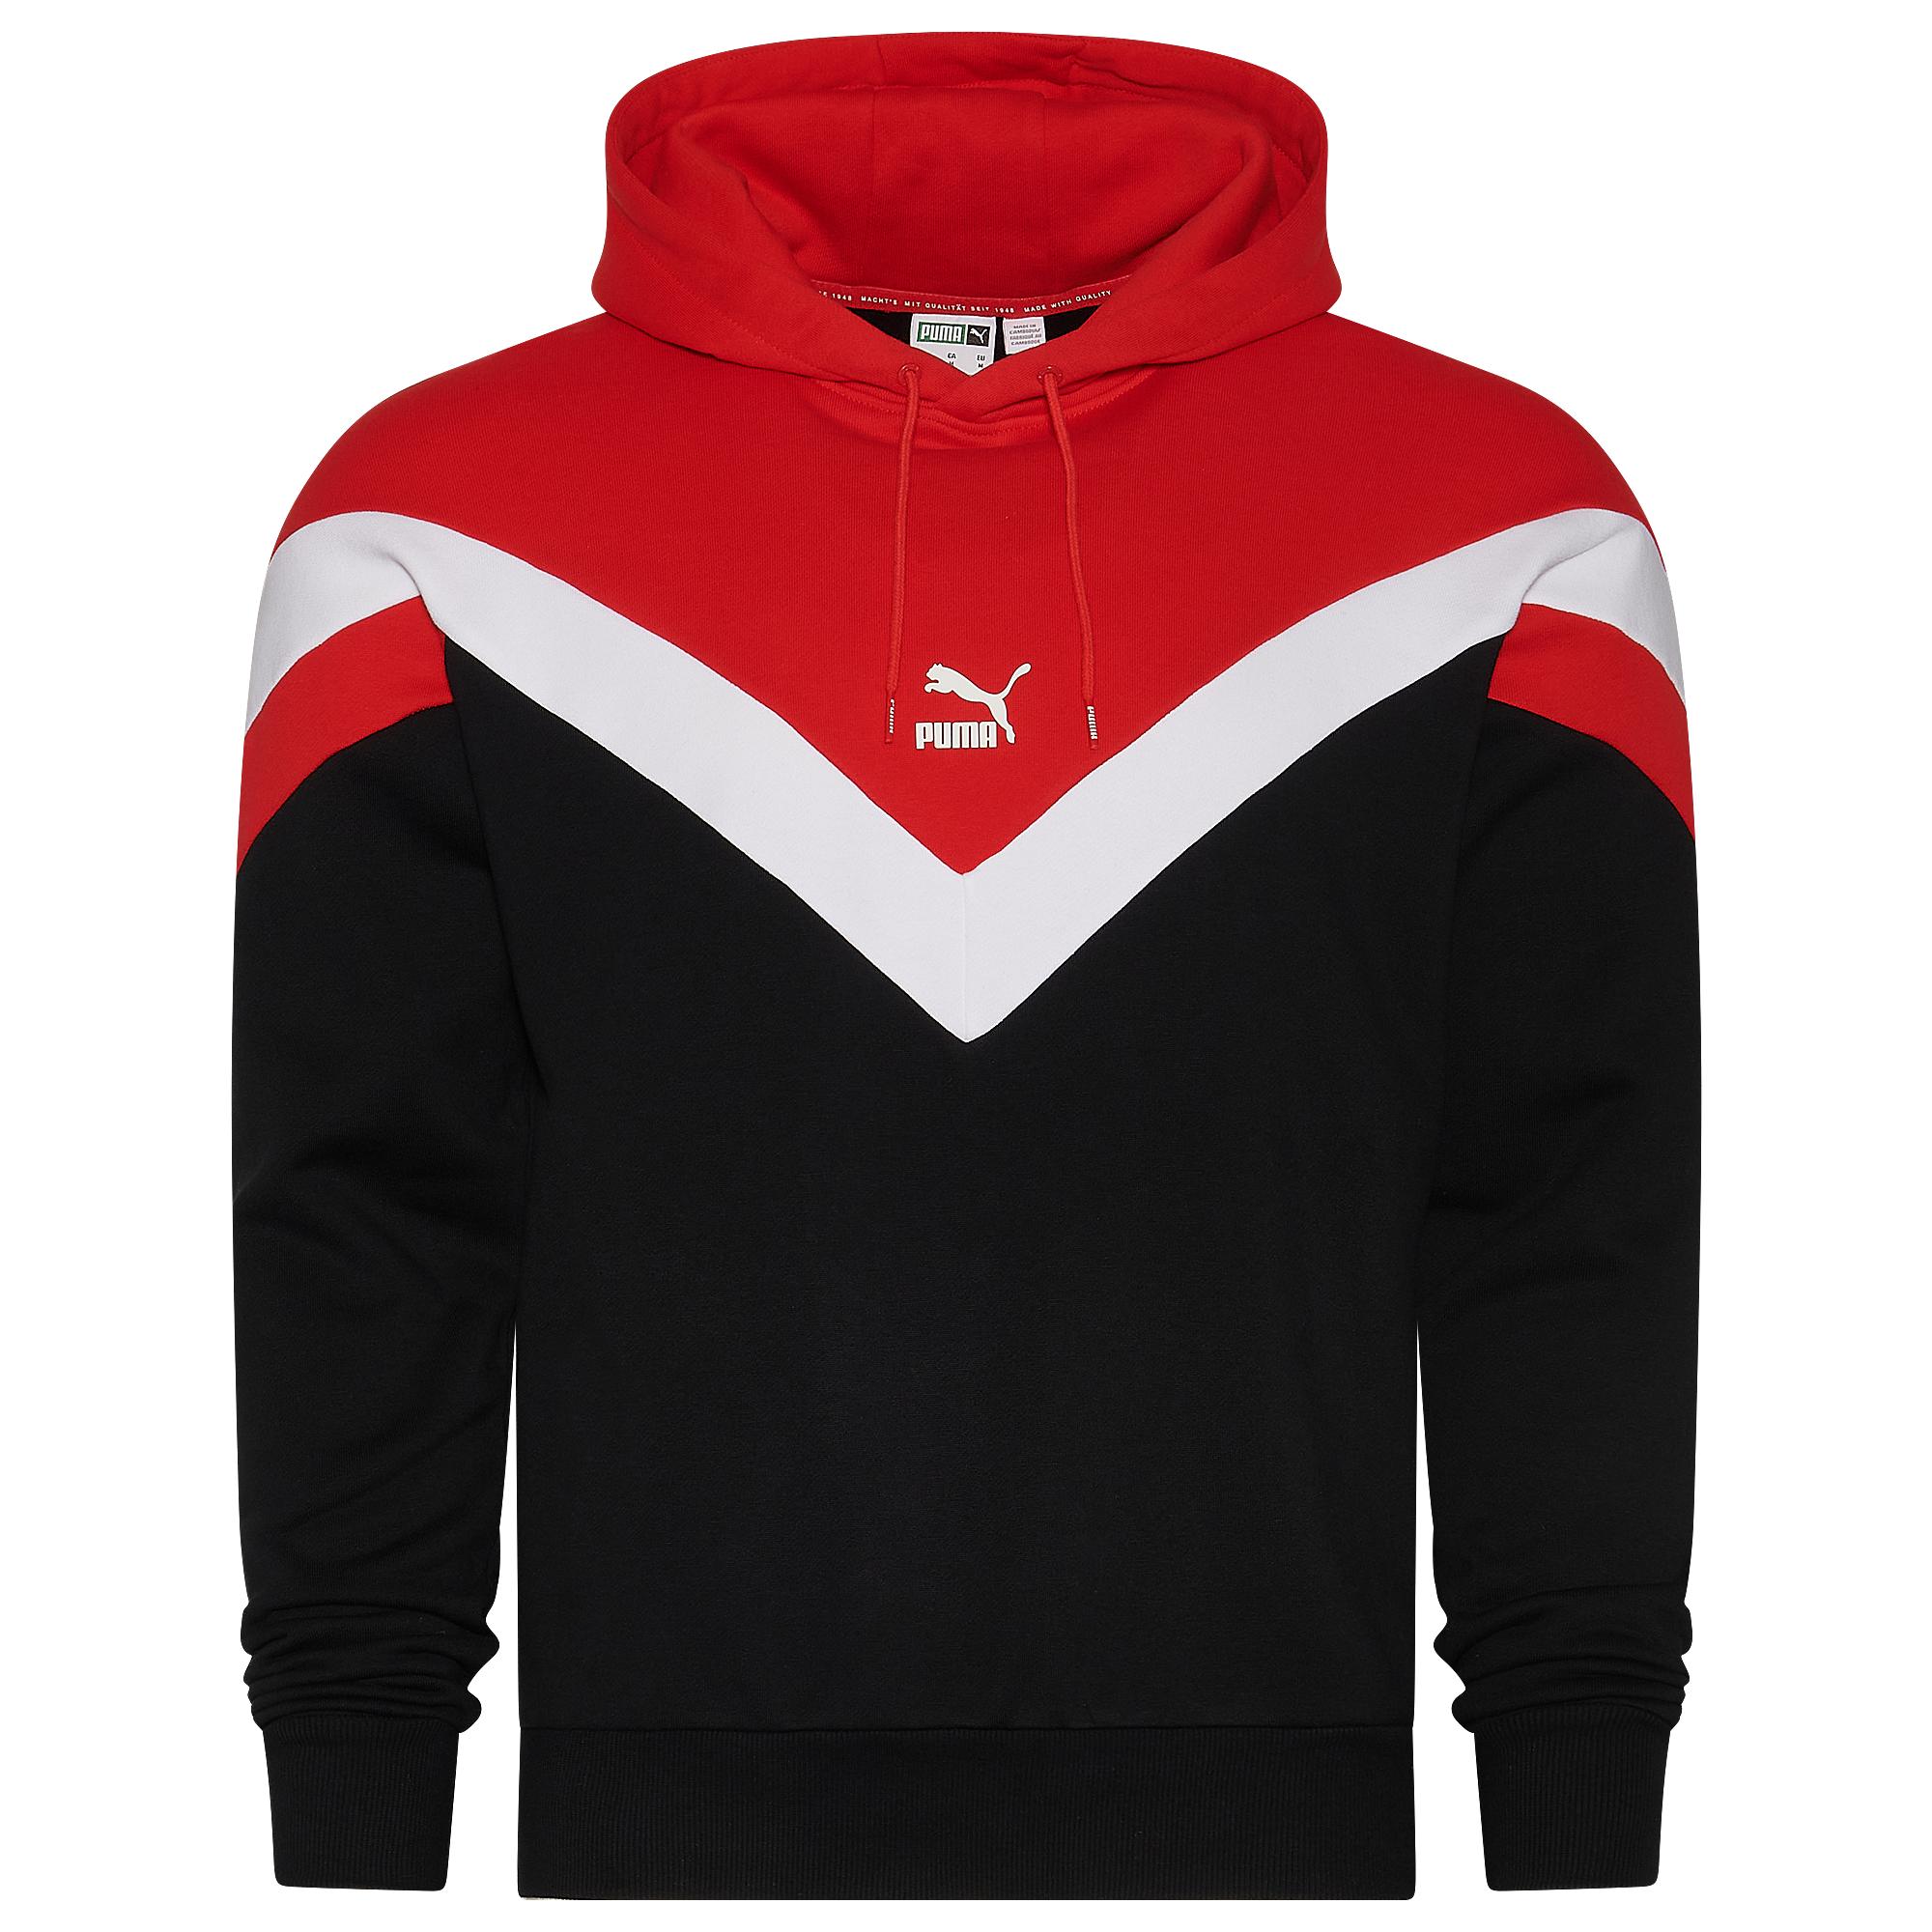 PUMA Cotton Iconic Hoodie in Black/Red (Red) for Men - Lyst